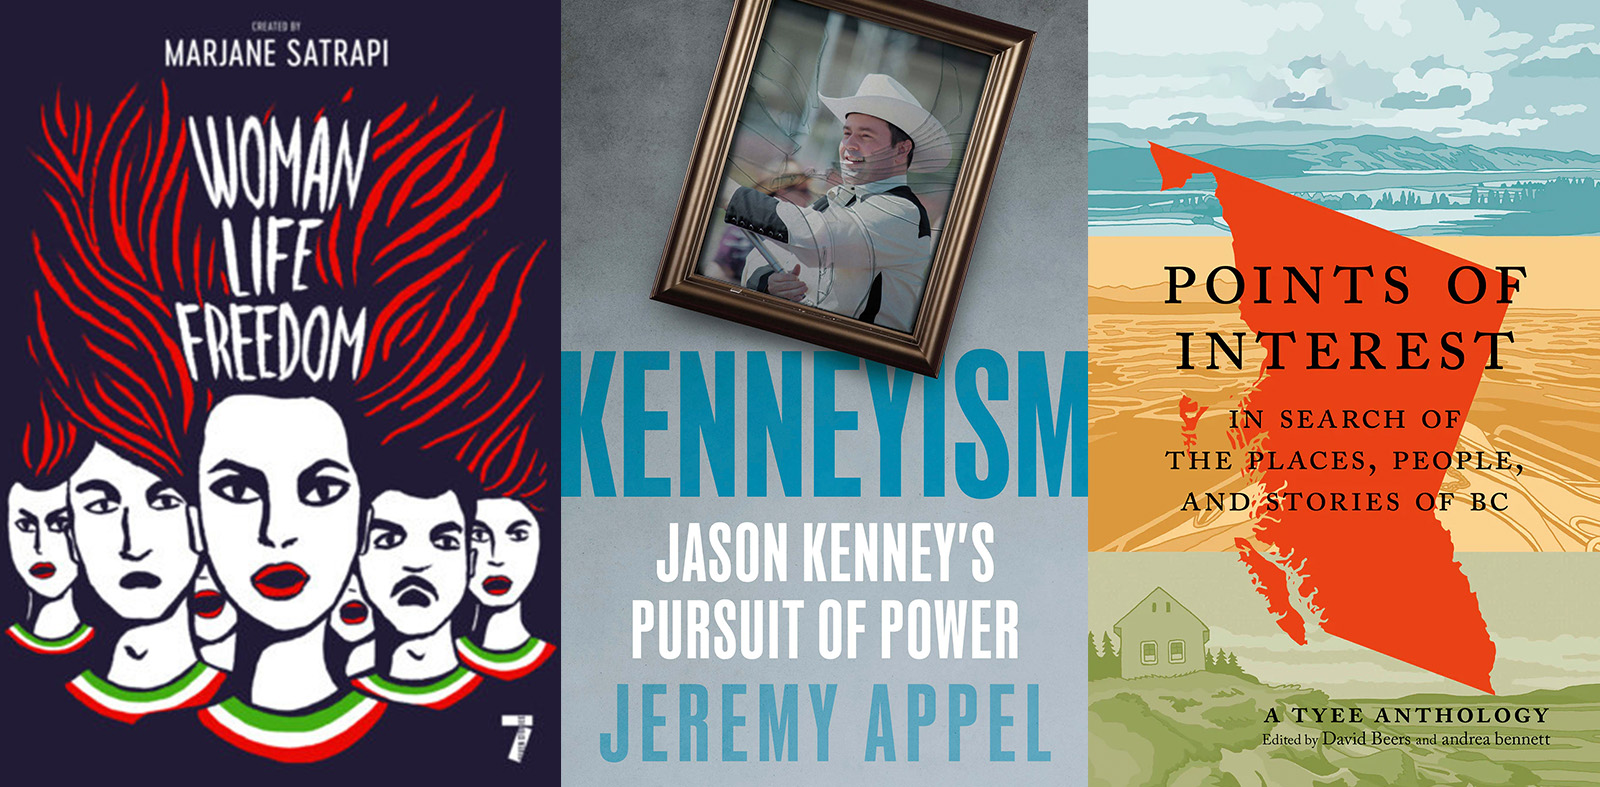 Three book covers, from left: 'Woman, Life, Freedom' by Marjane Satrapi; 'Kenneyism' by Jeremy Appel; 'Points of Interest,' edited by David Beers and andrea bennett.